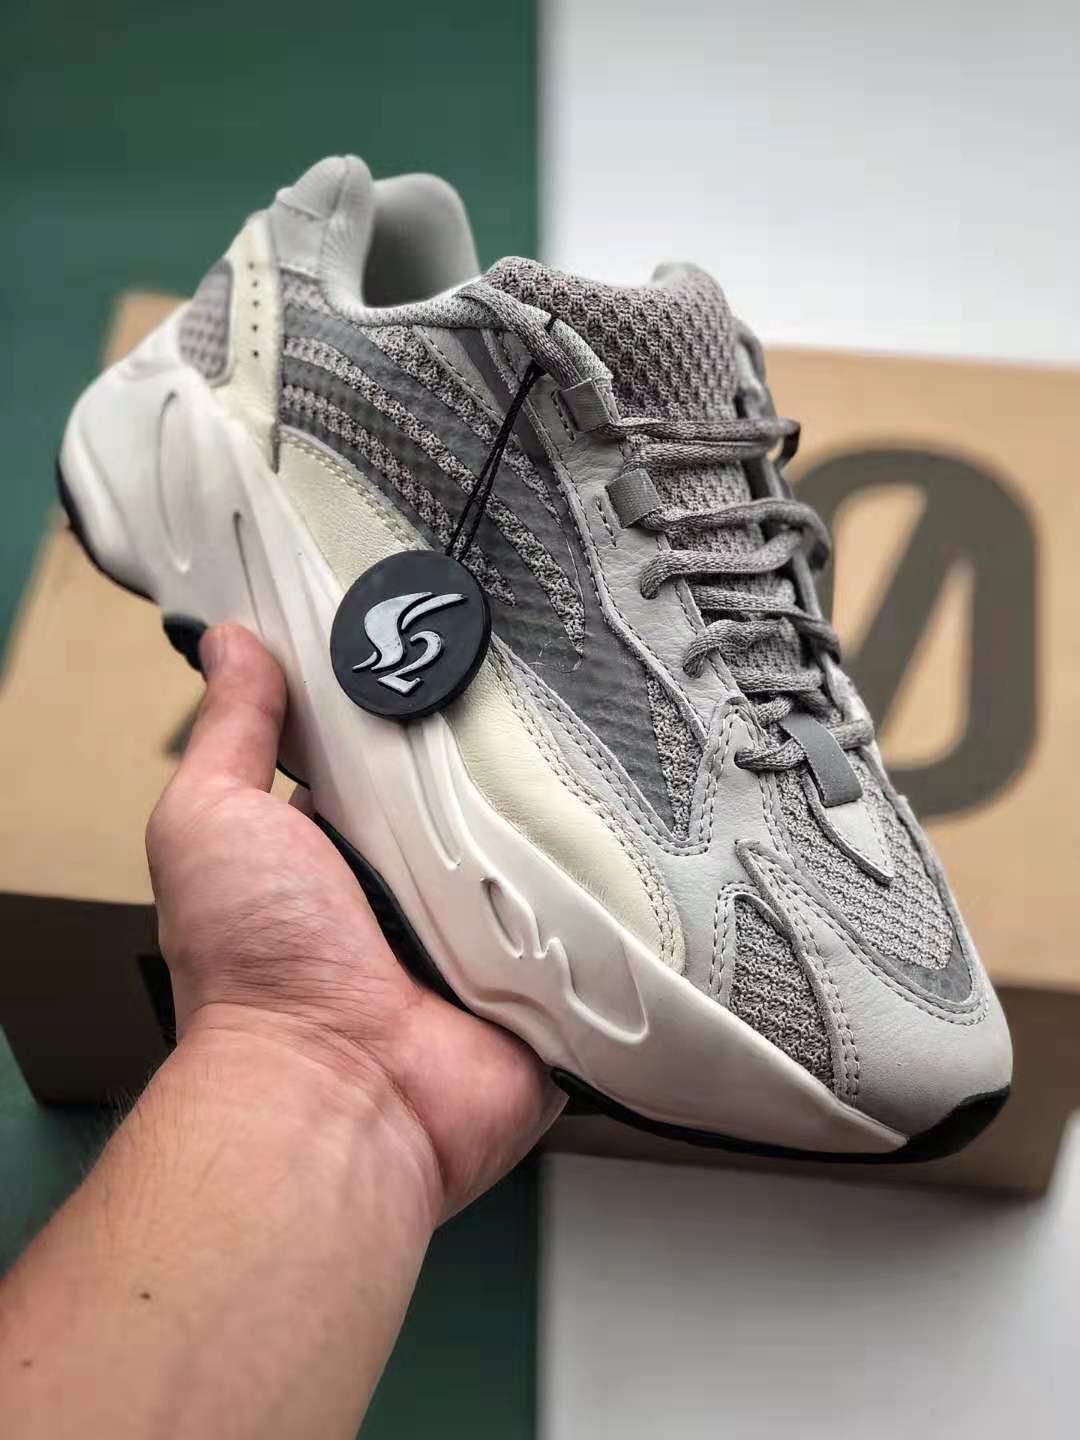 Adidas Yeezy Boost 700 V2 CreamWhite GY7924 - Stylish Sneakers with Exceptional Comfort.